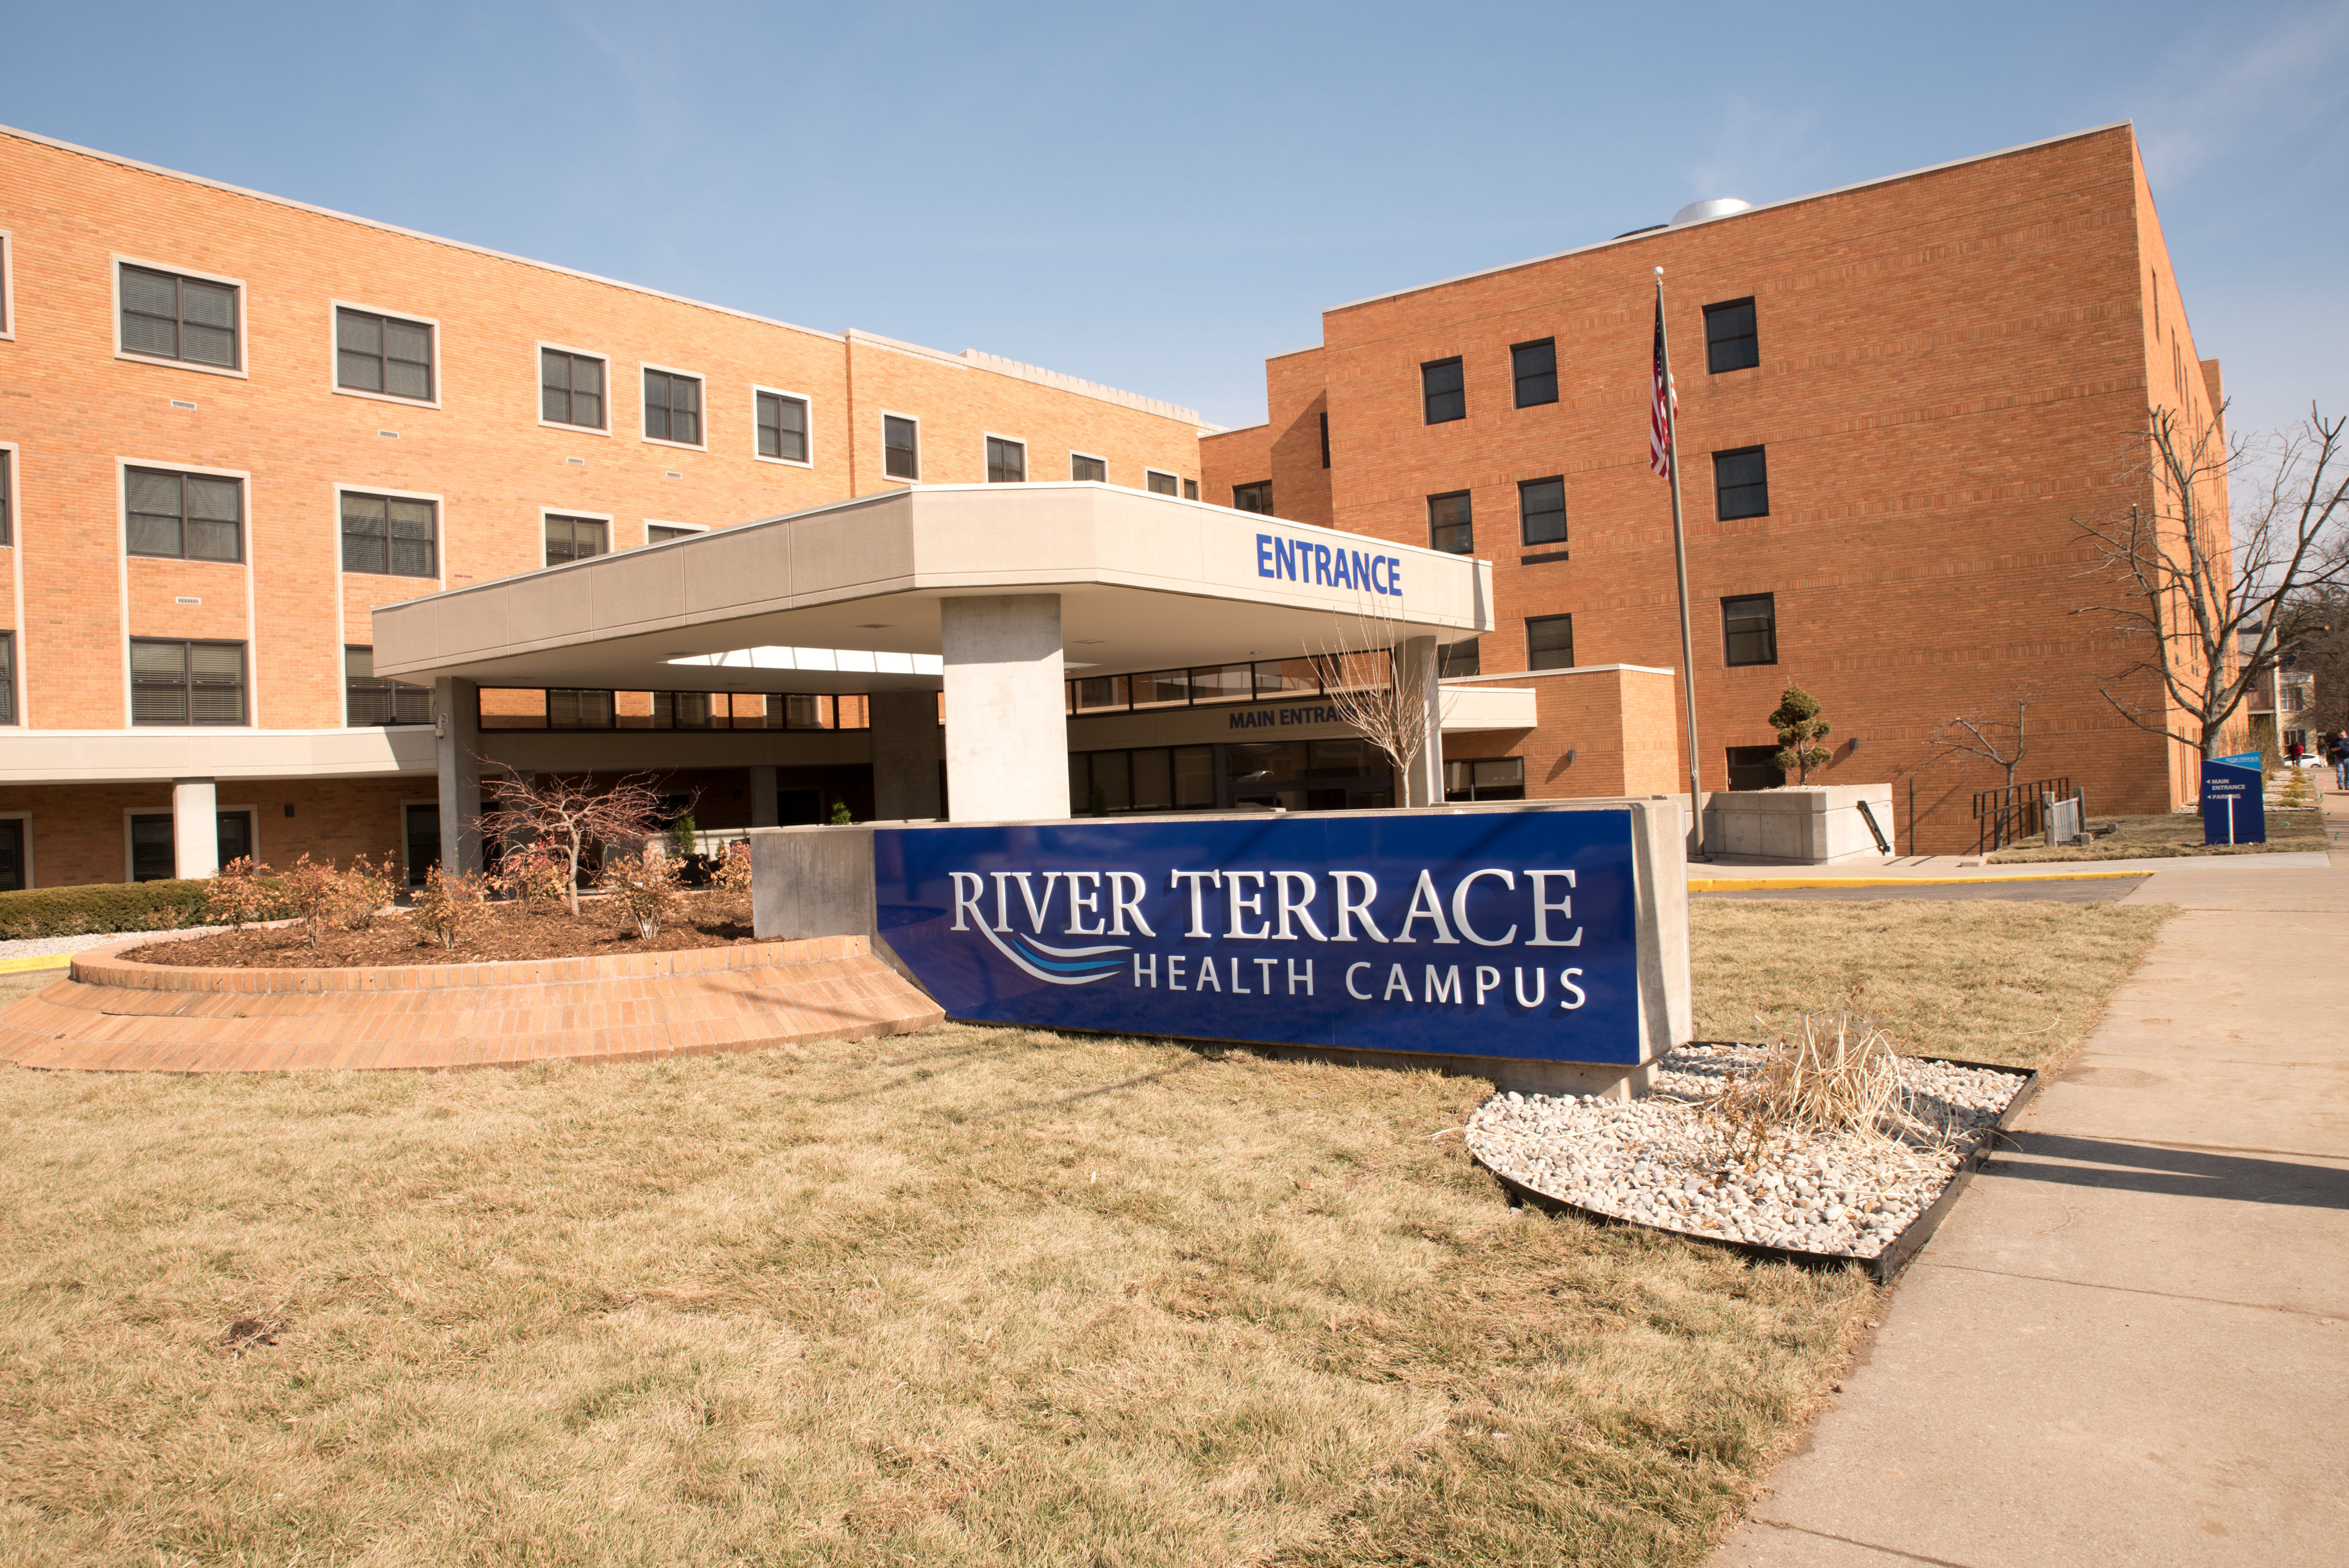 River Terrace Health Campus image